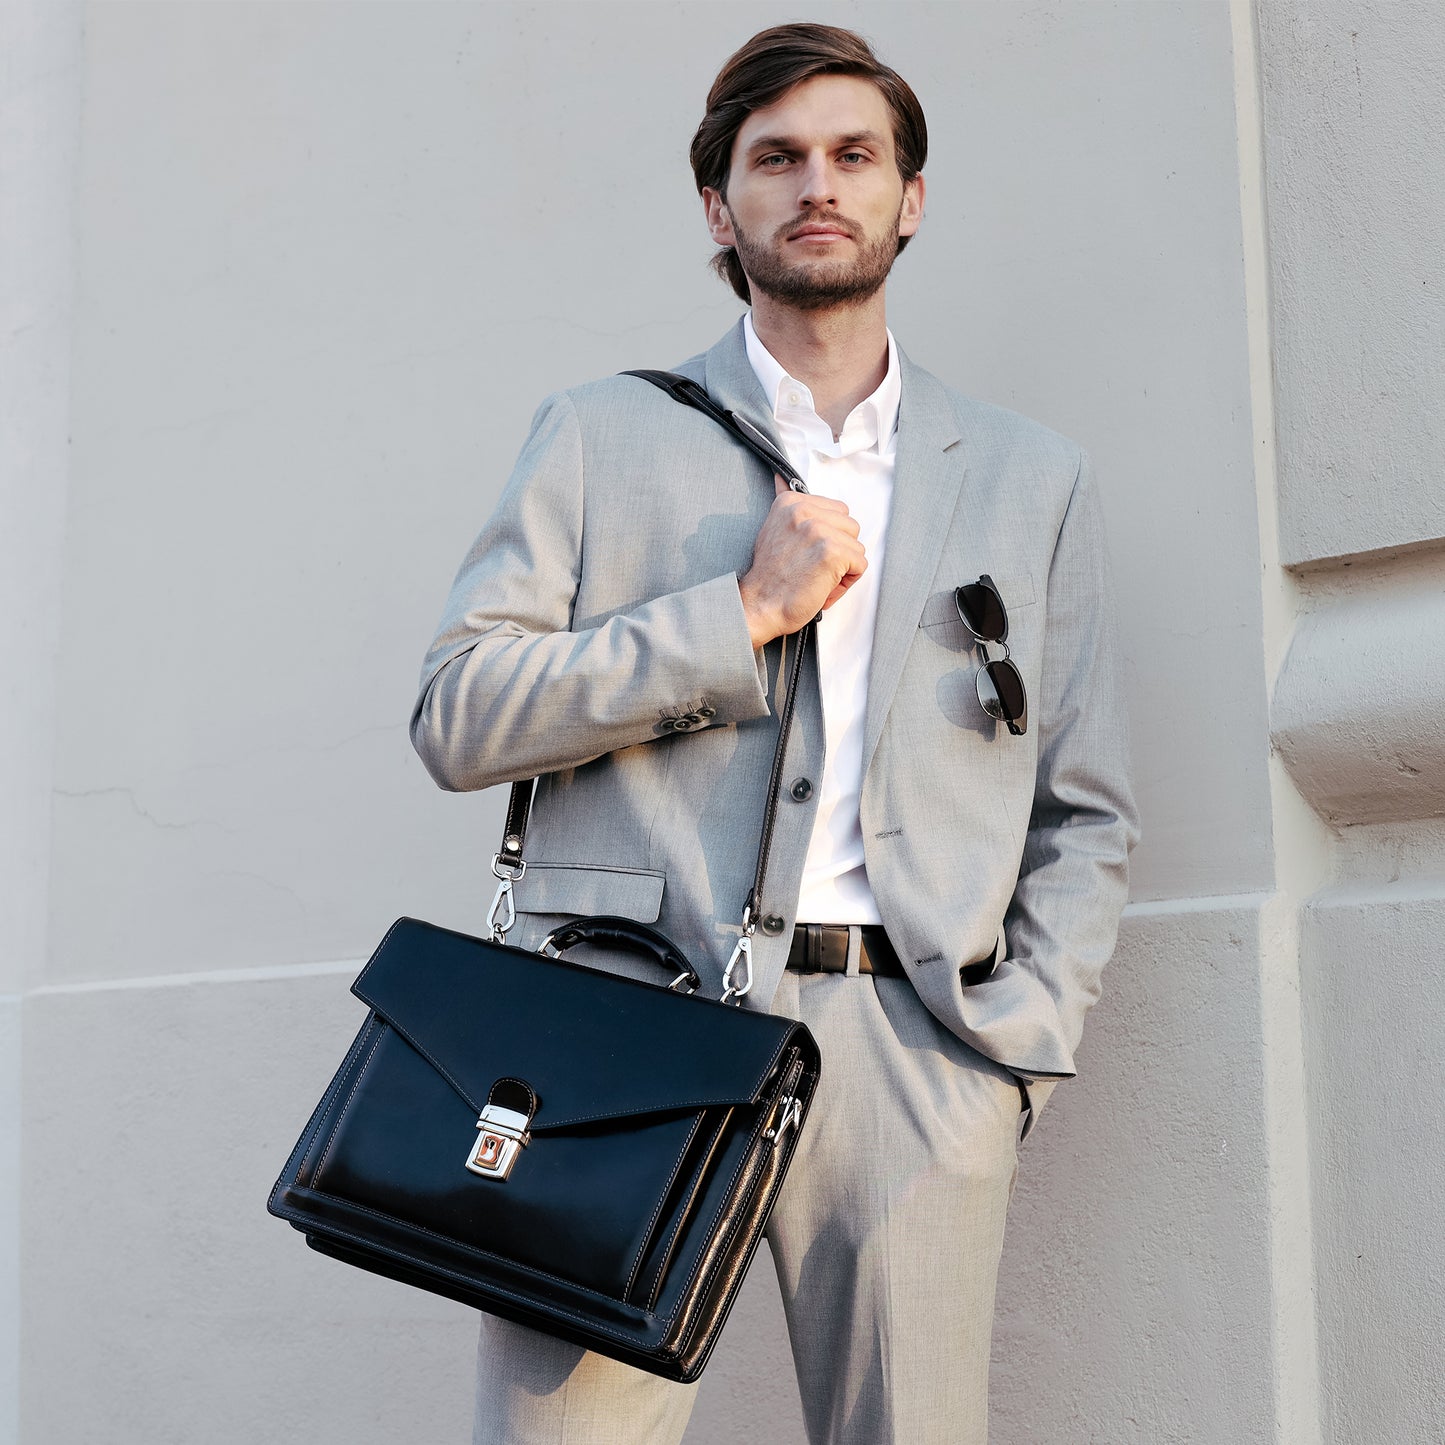 Classic Design Leather Briefcase - The Magus Briefcase Time Resistance   